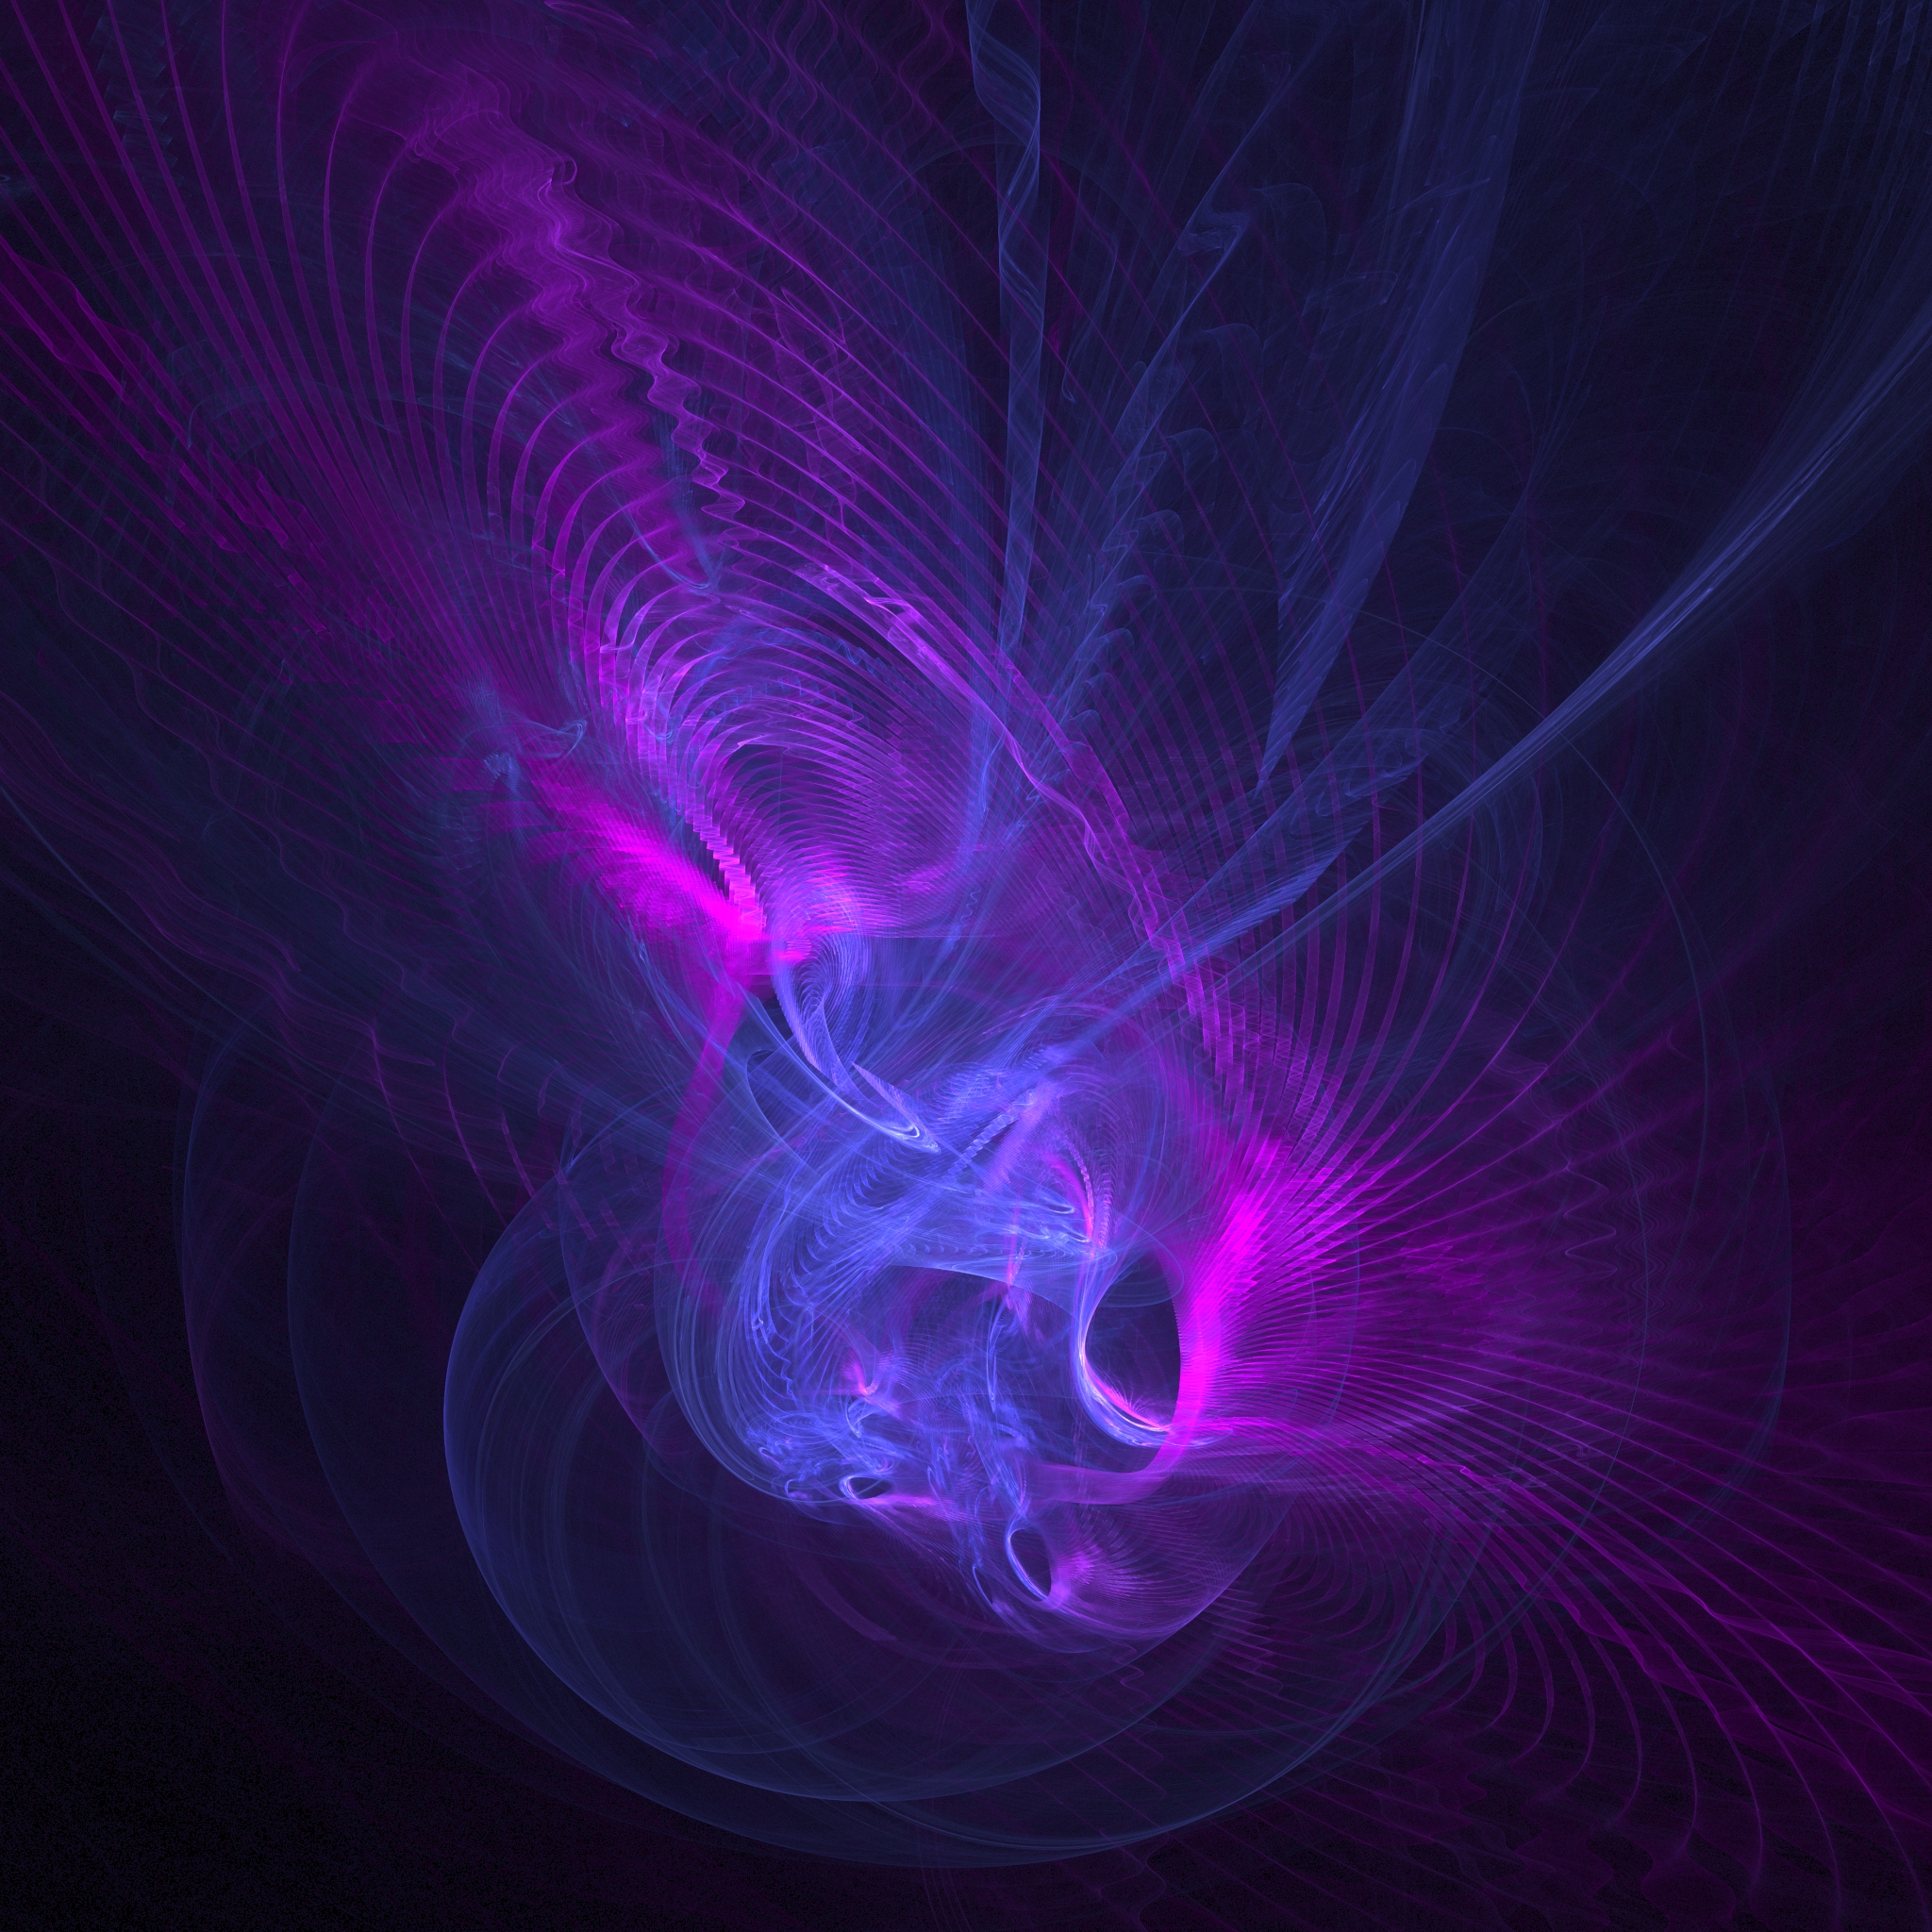 purple, abstract, art, lilac, violet, lines, fractal